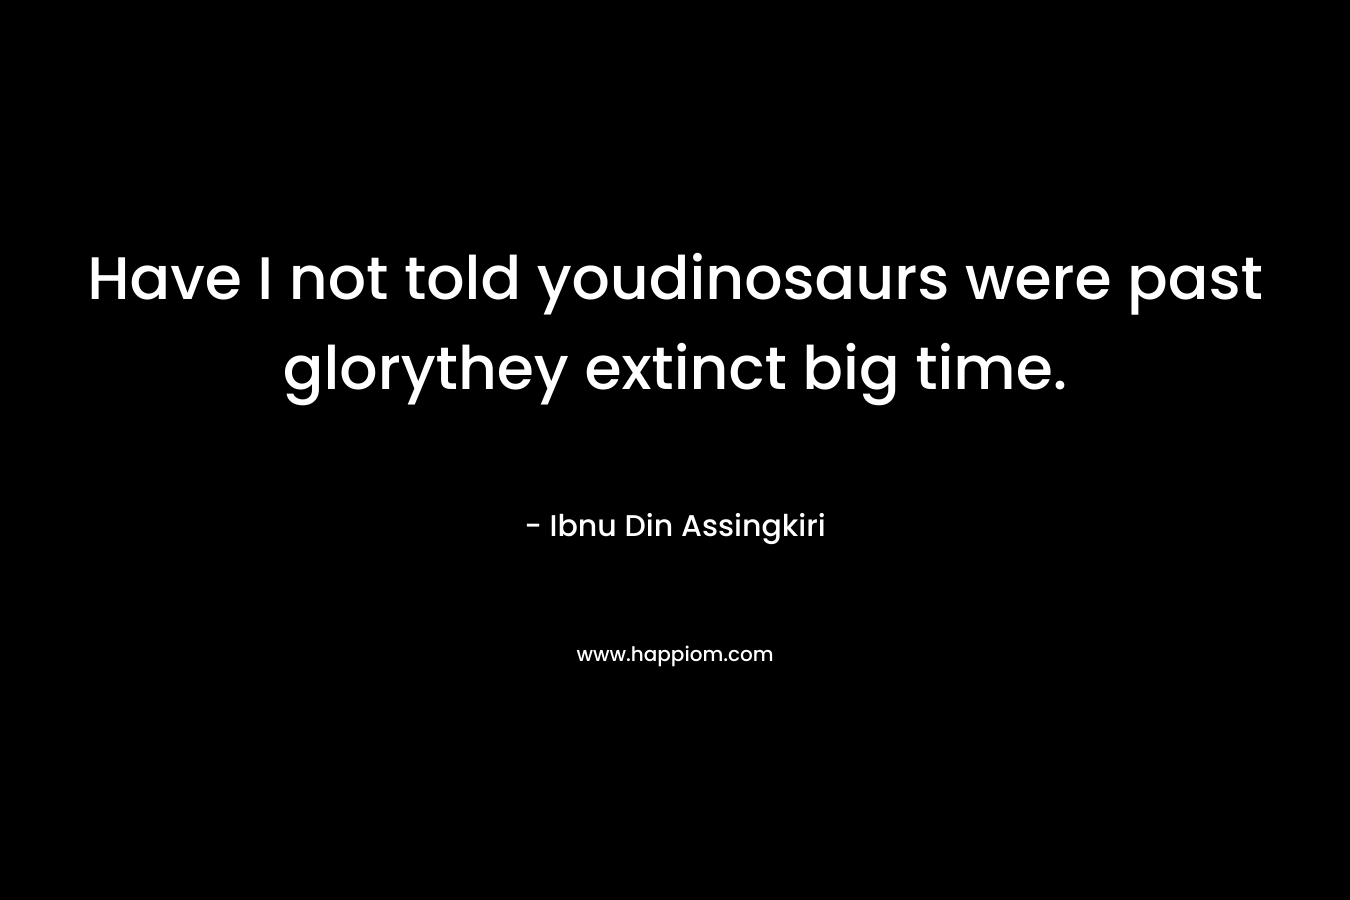 Have I not told youdinosaurs were past glorythey extinct big time.